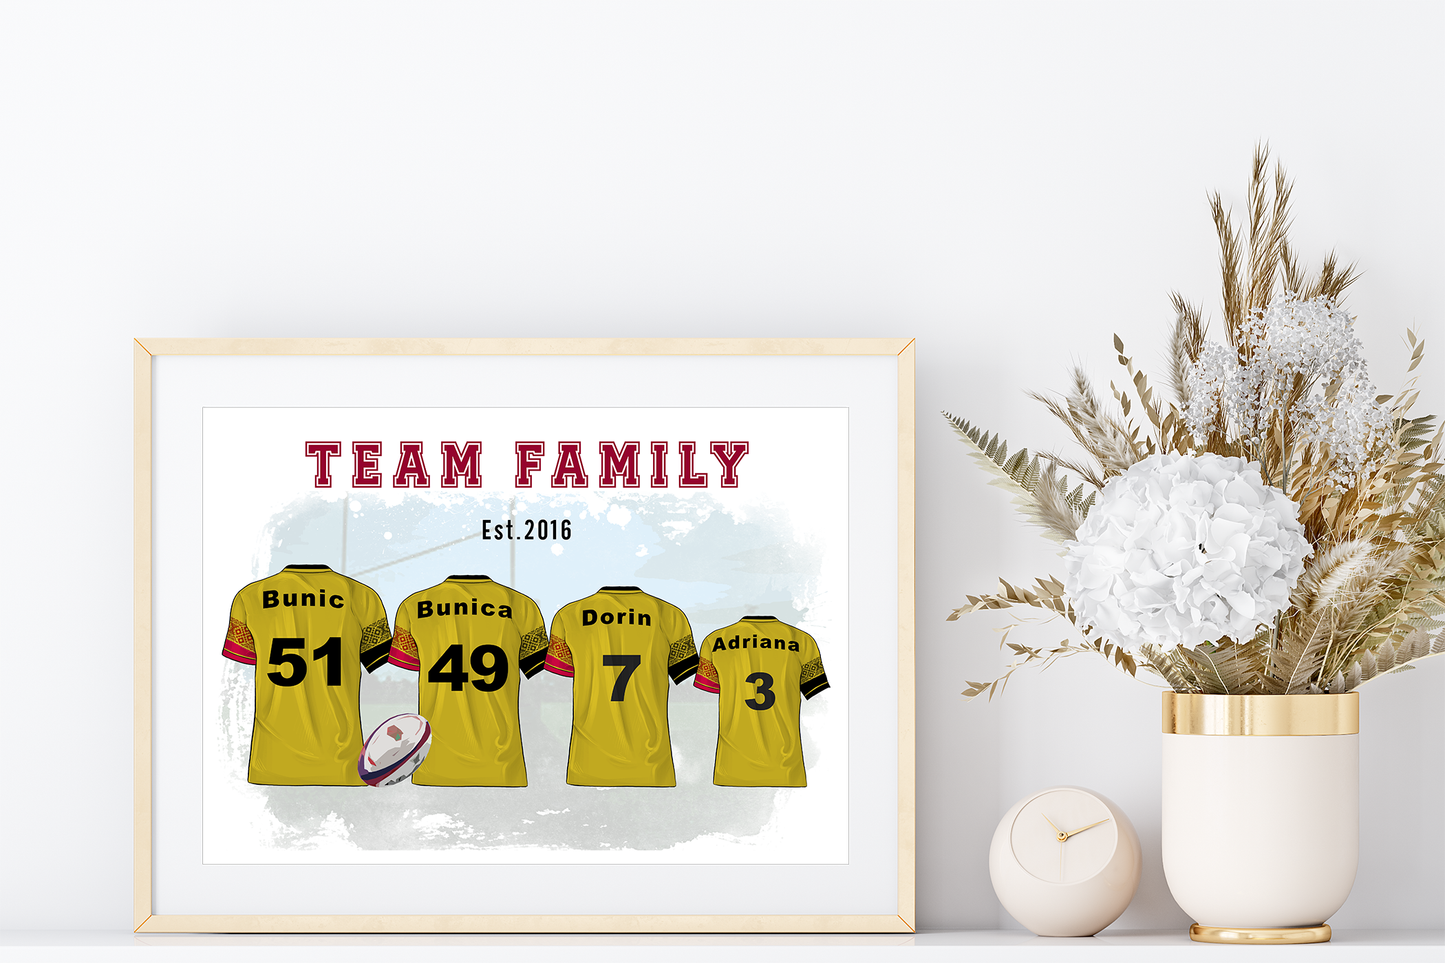 Custom Rugby Union Family Shirts | International rugby team shirts | Gift for Sports Fans